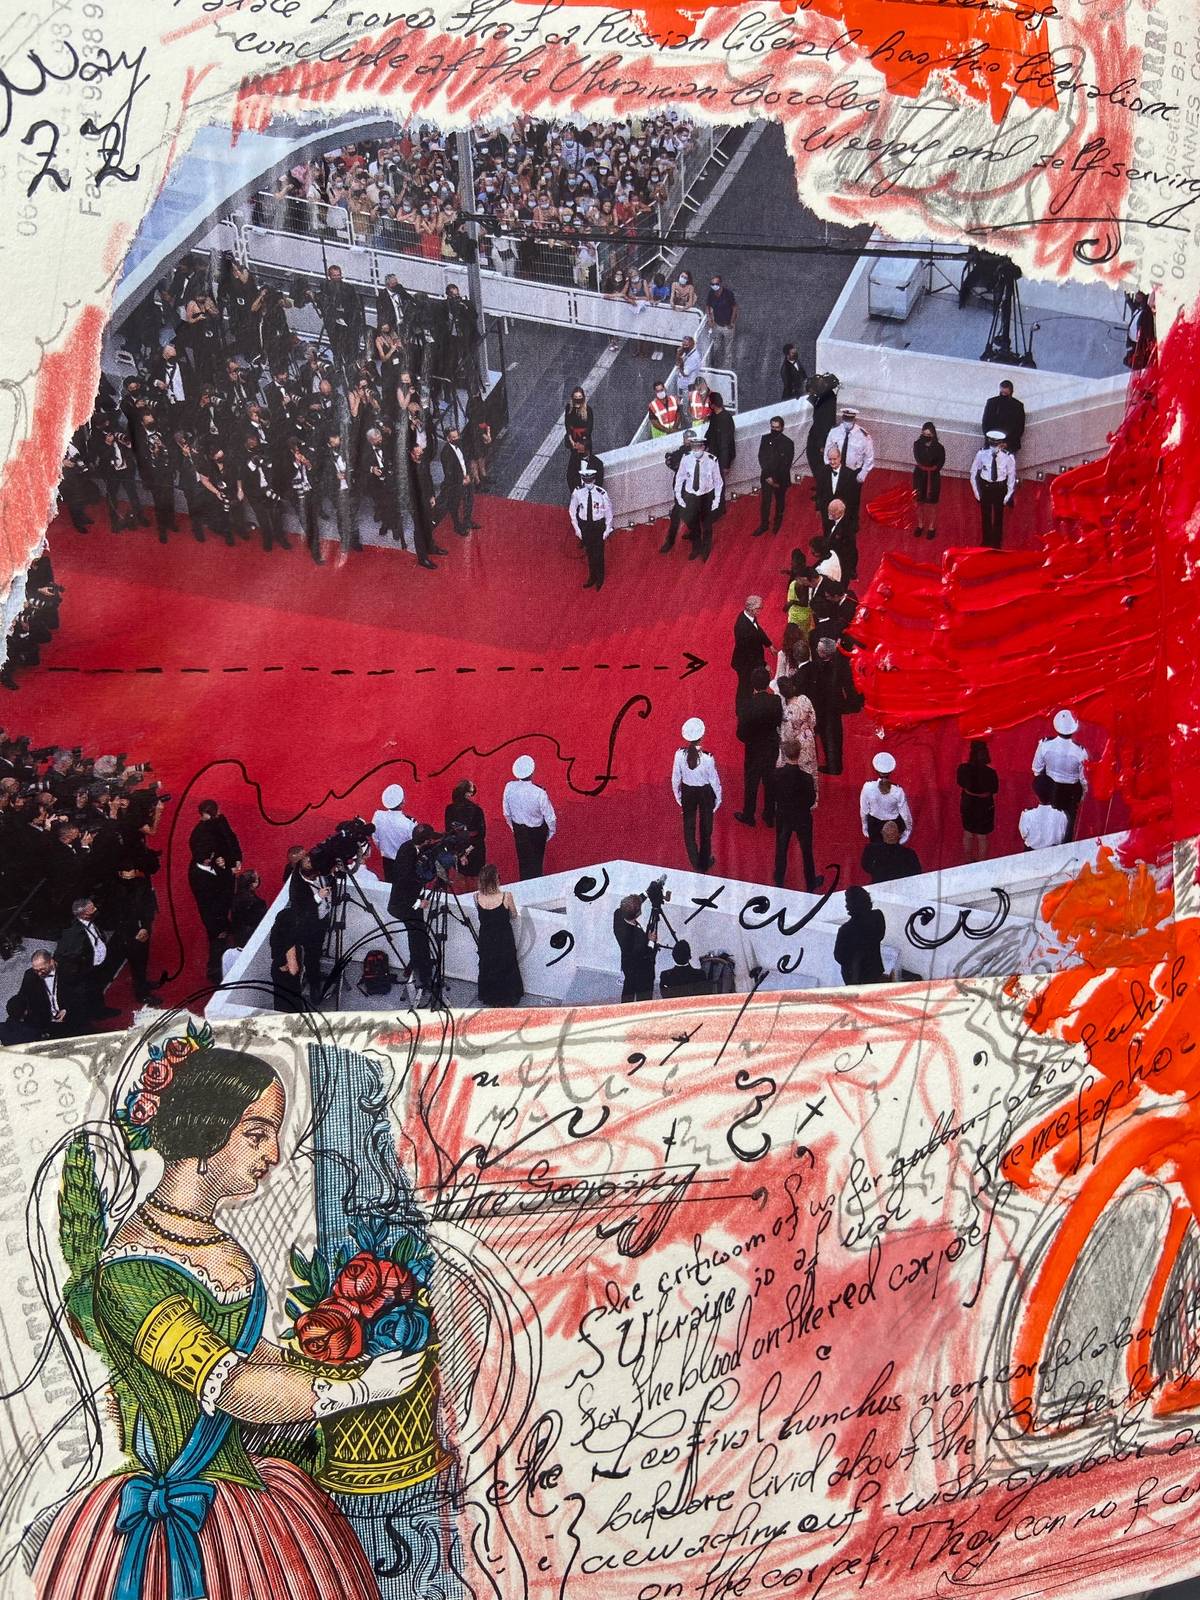 From the author's notebook, a collage of images from the red carpet at Cannes, May 22